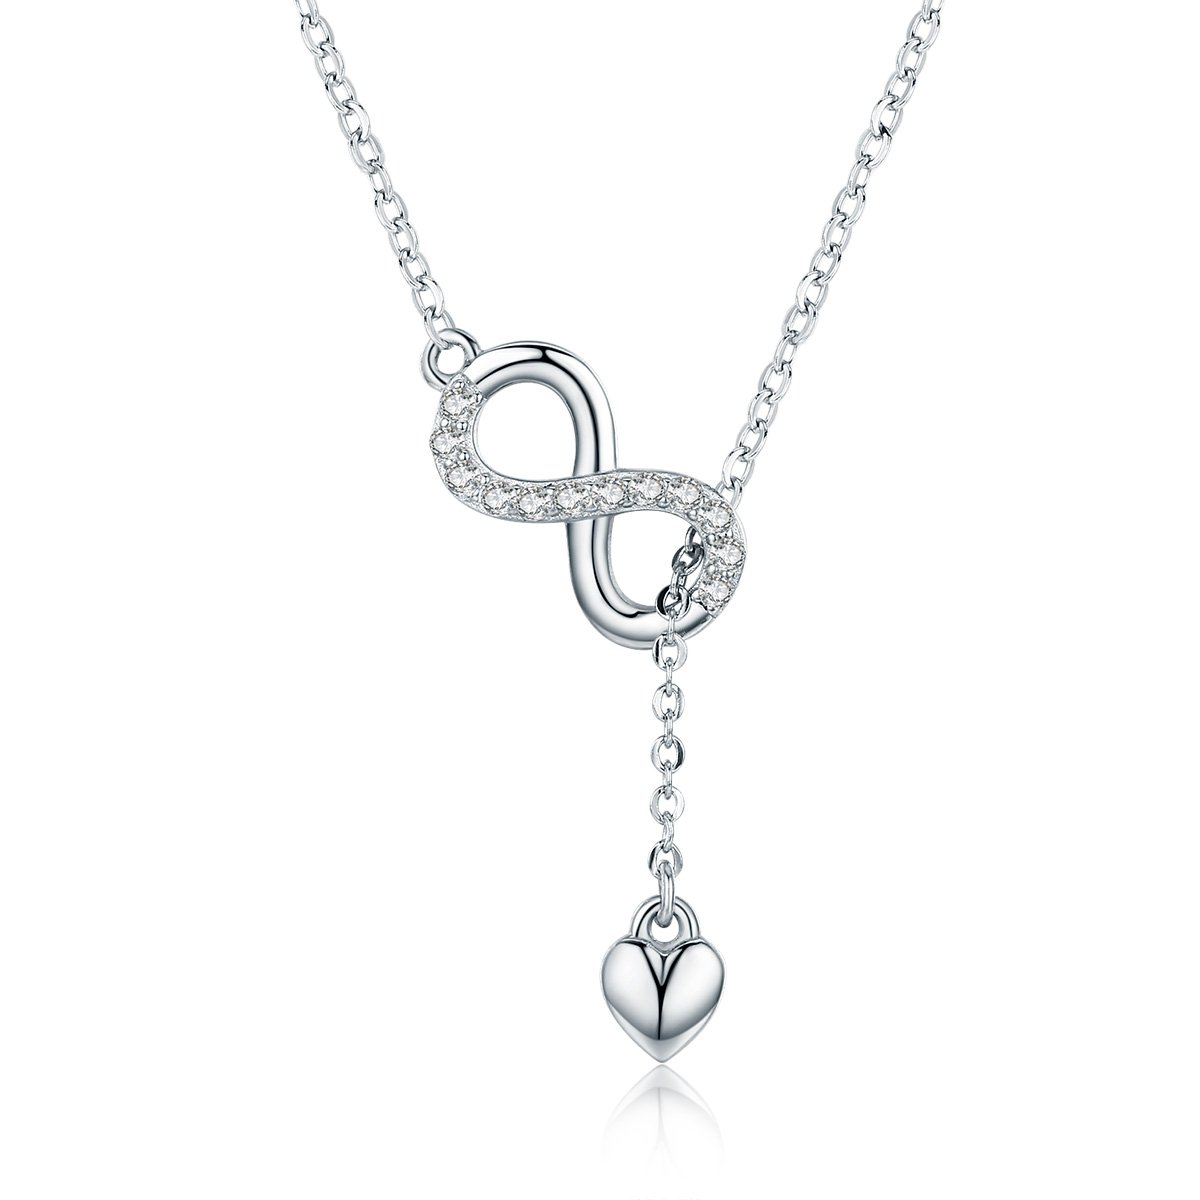 Infinity Of Love 925 Sterling Silver Necklace - Aisllin Jewelry